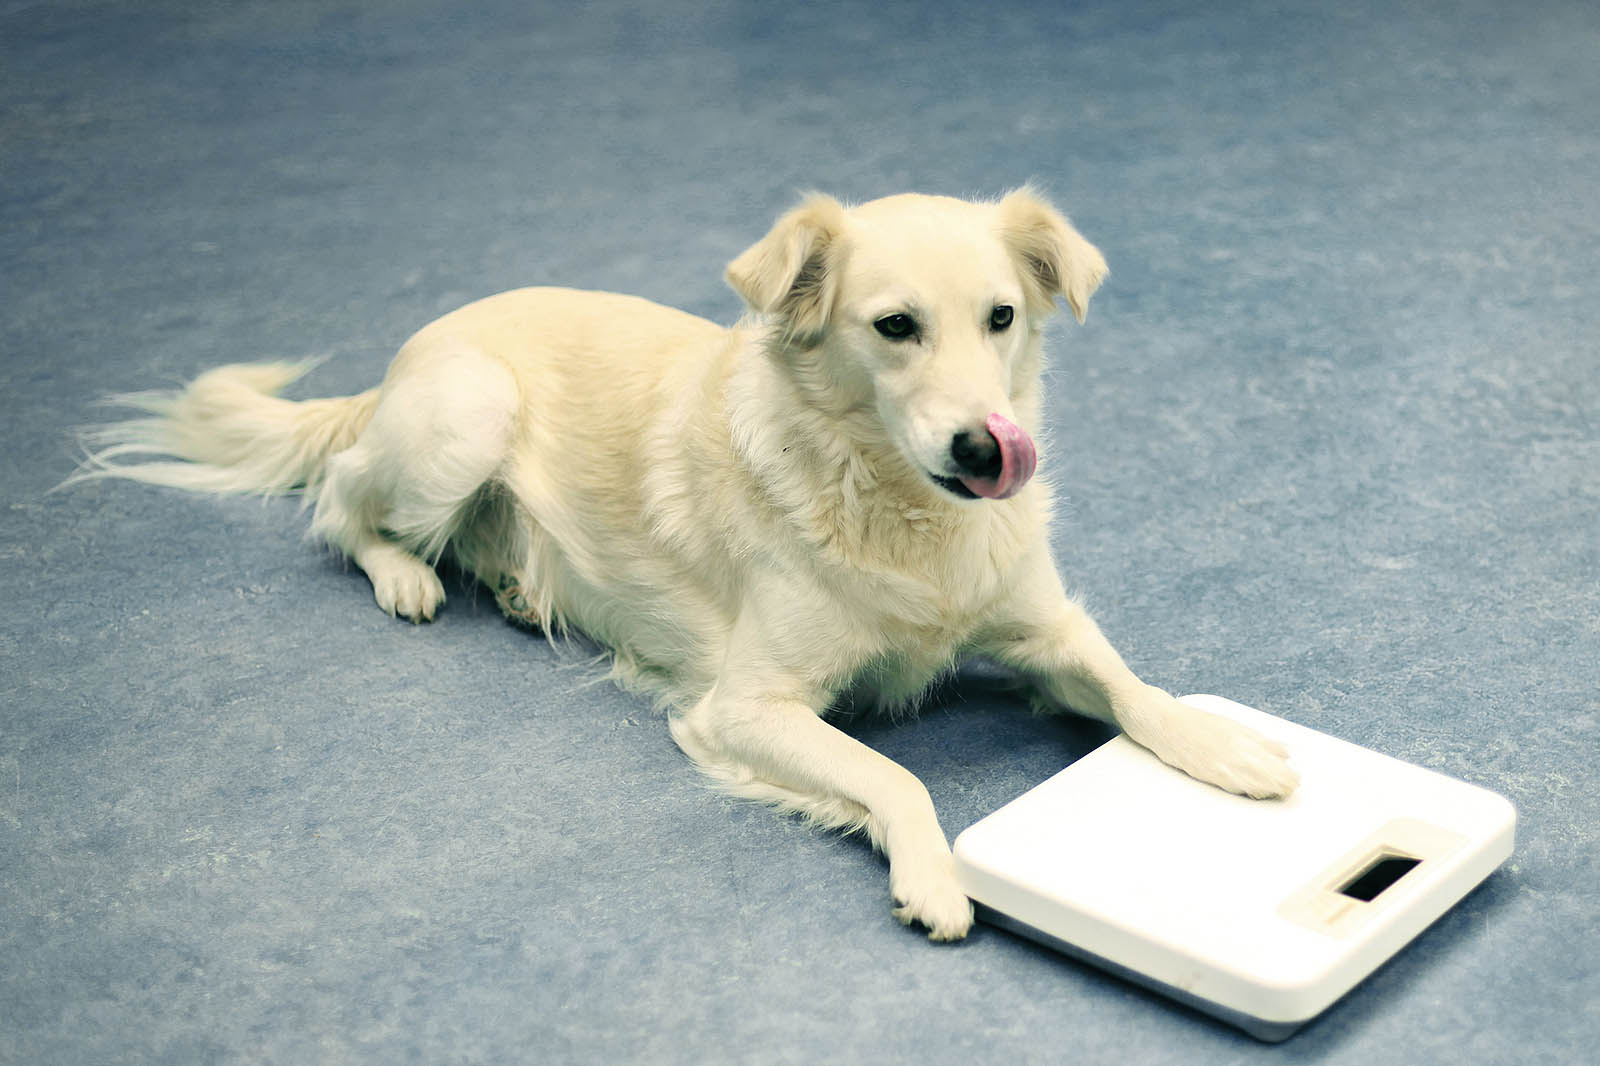 Dog with bathroom scale